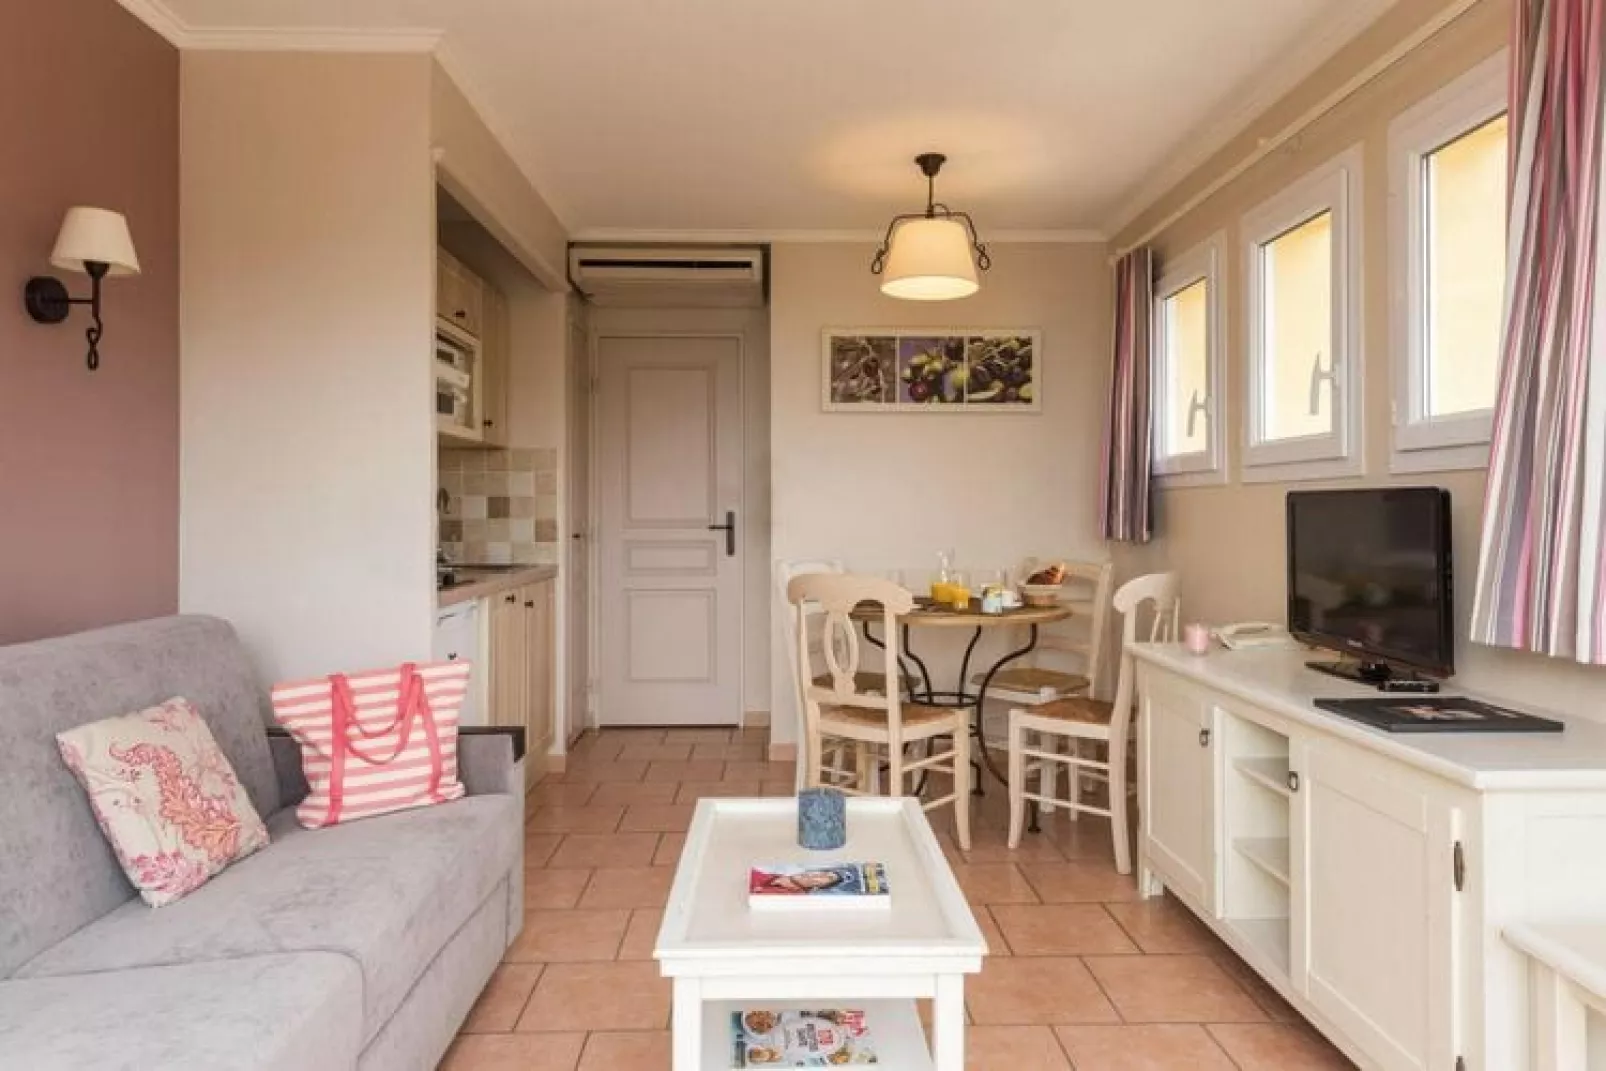 Residence Les Calanques, Les Issambres-27 Standard - Apt. 6 p. - 1 bedroom+1 sleeping alcove - terrace-Woonkamer